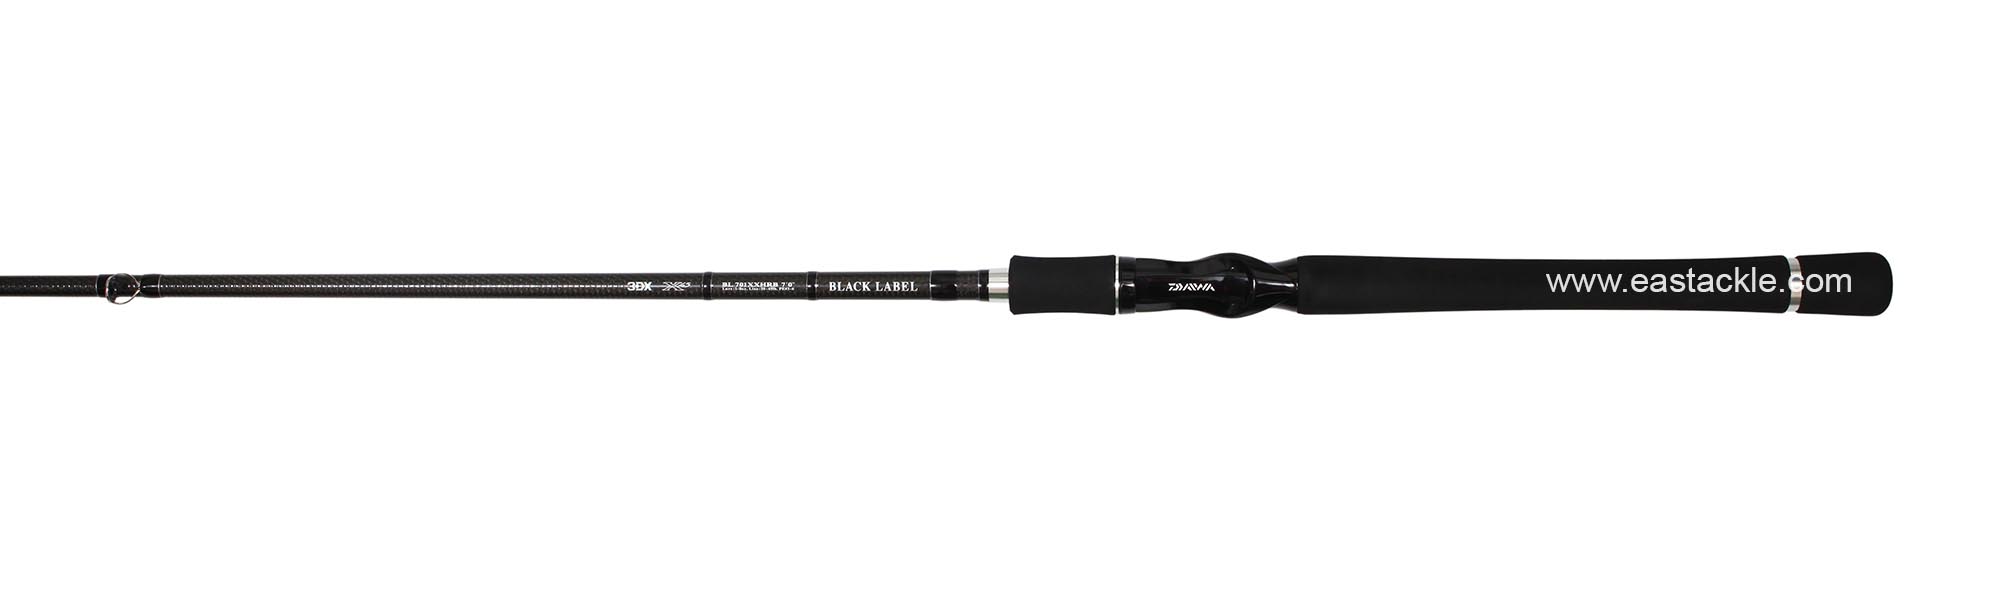 Daiwa - Black Label 701XXHB - Bait Casting Rod - Butt to Stripper Section (Top View) | Eastackle